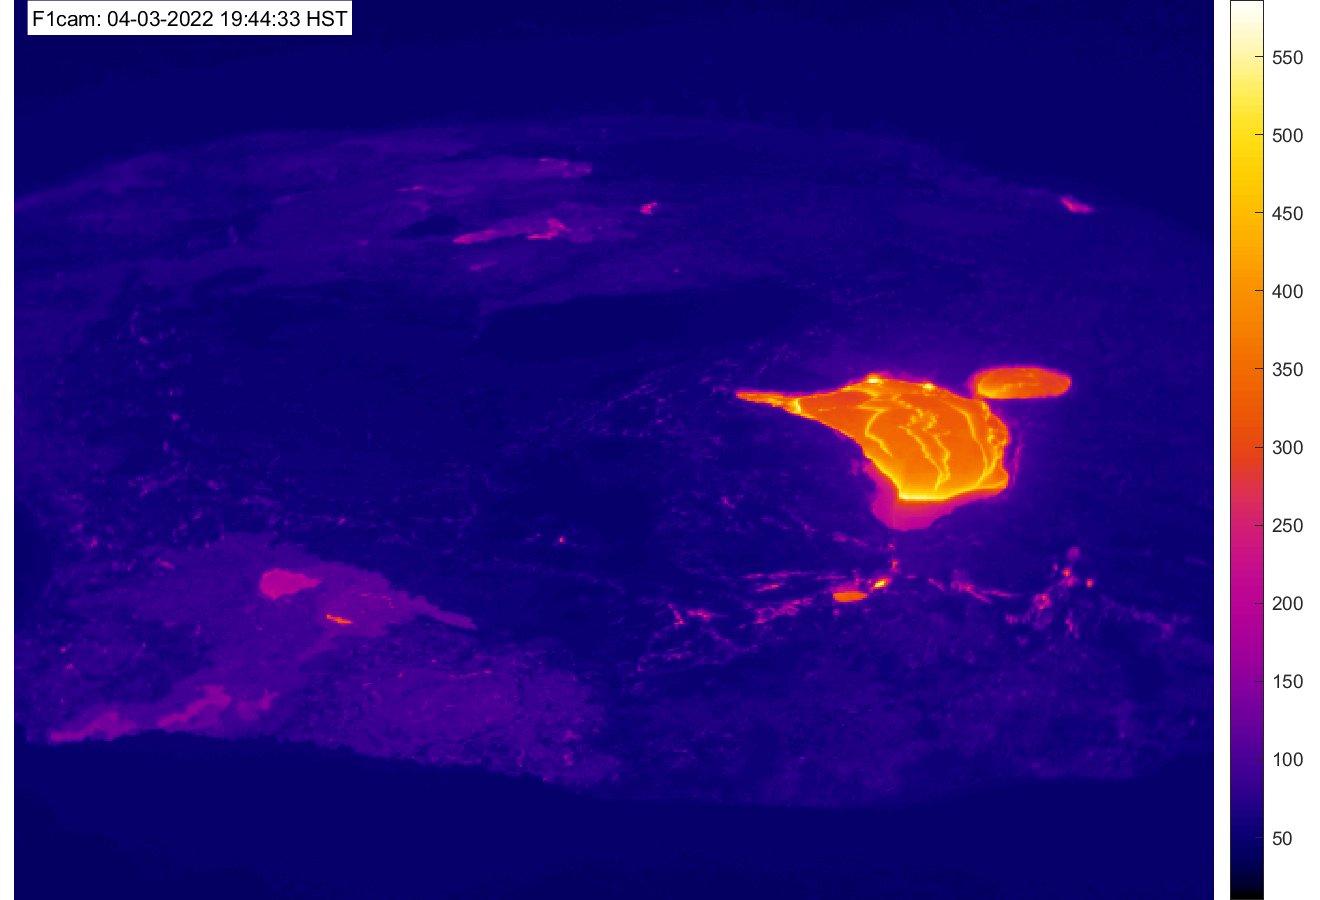 Lava lake in Halema'uma'u crater of Kilauea volcano seen on the thermal crater rim webcam of HVO